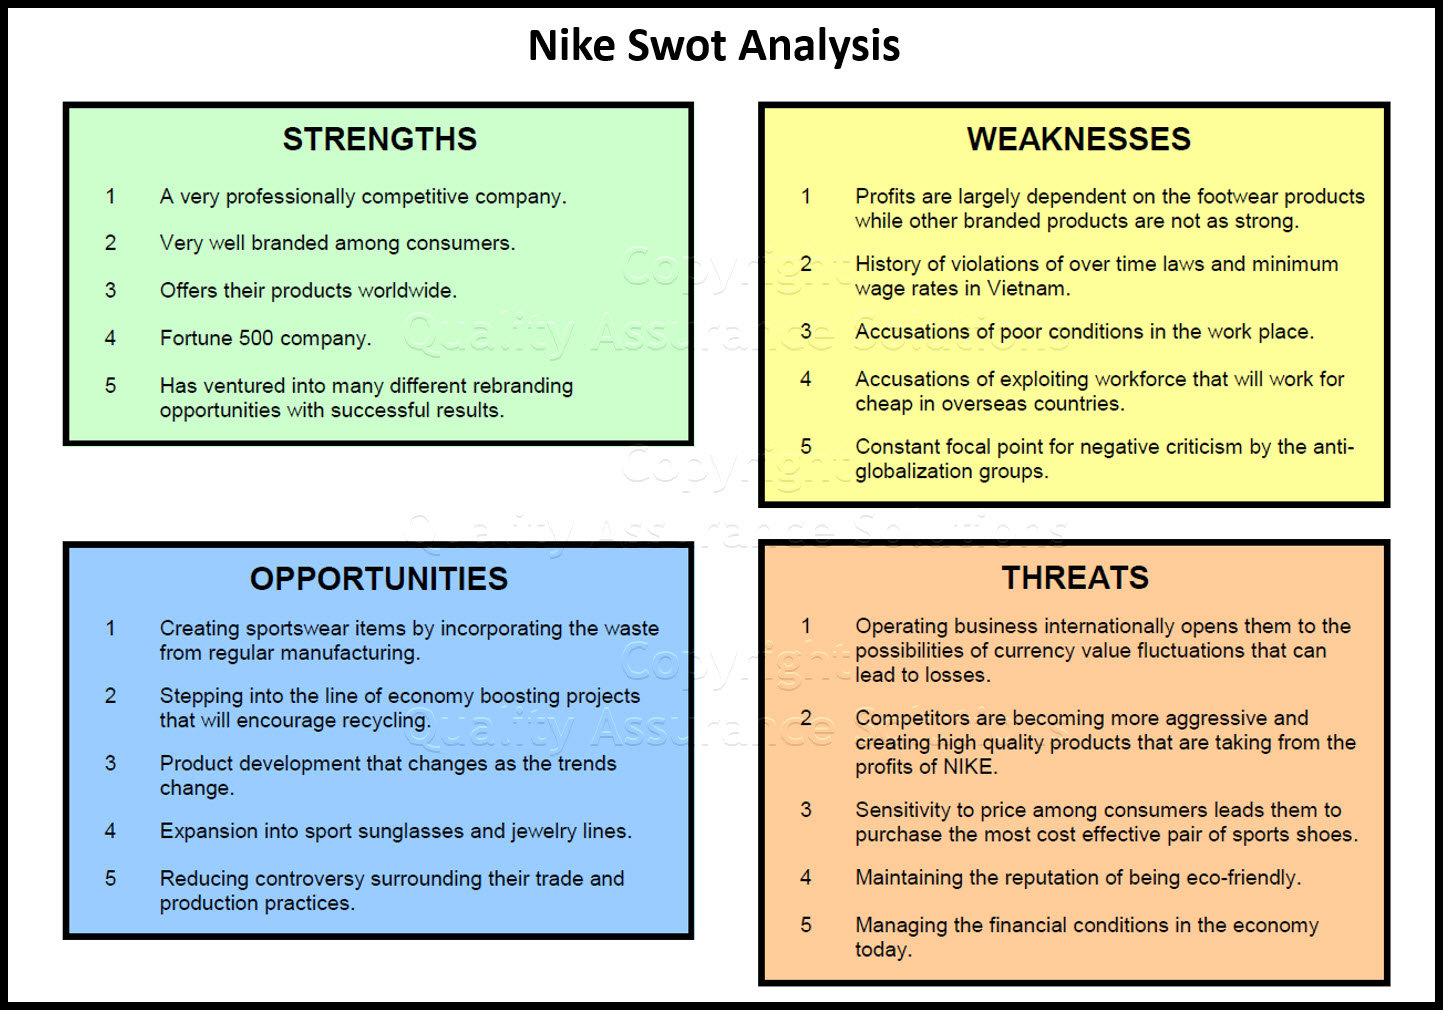 Check this Swot Analysis Nike, this Nike Swot Analysis breaks down Nike strengths, weaknesses, oppurtunities and weaknesses.